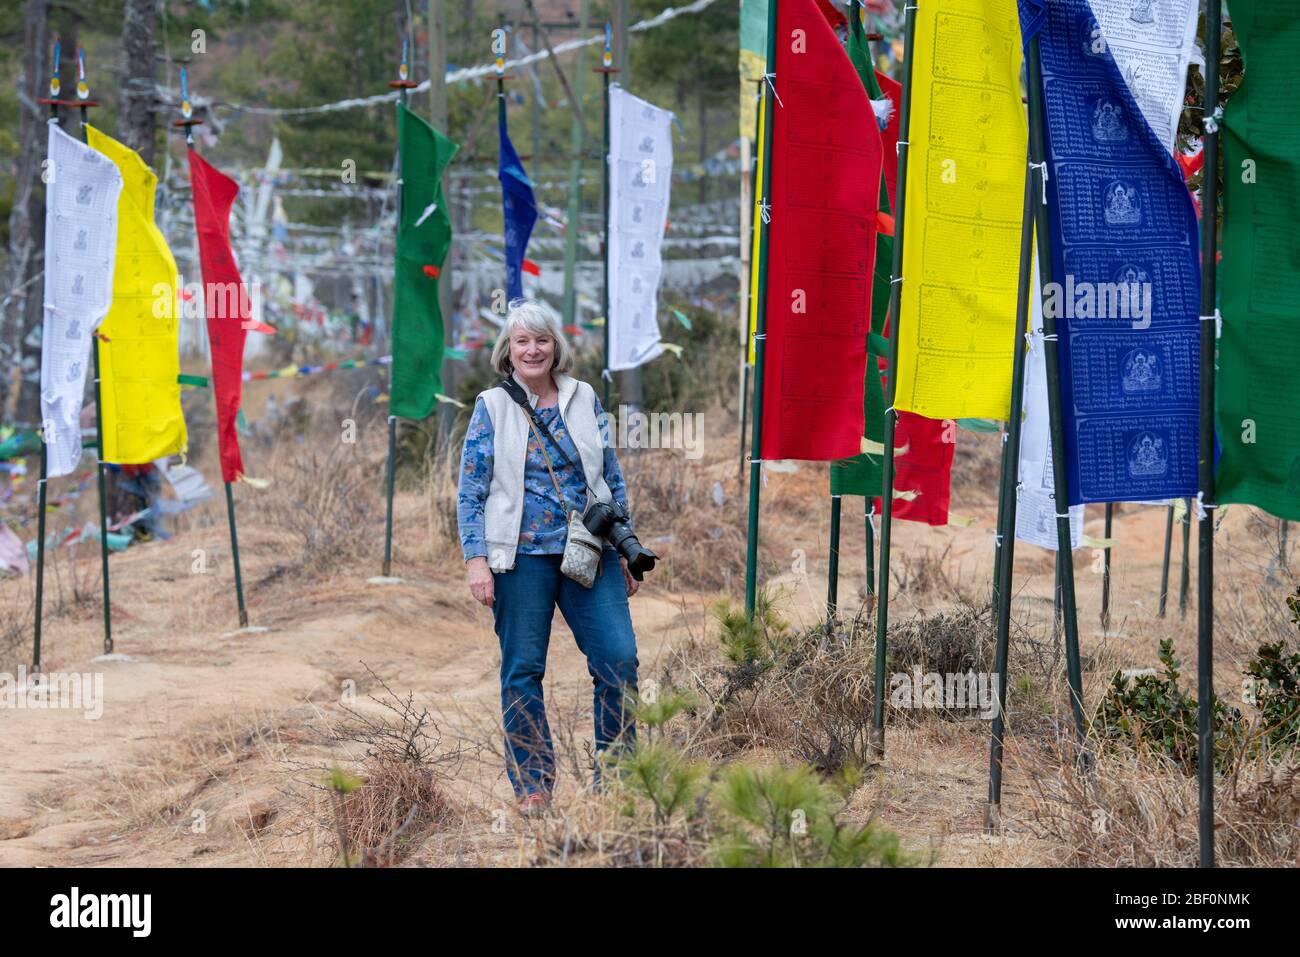 Bhutan, Thimphu. Prayer flags on mountain top at the Sangaygang Geodetic Station. Female tourist hiking on trail. Stock Photo